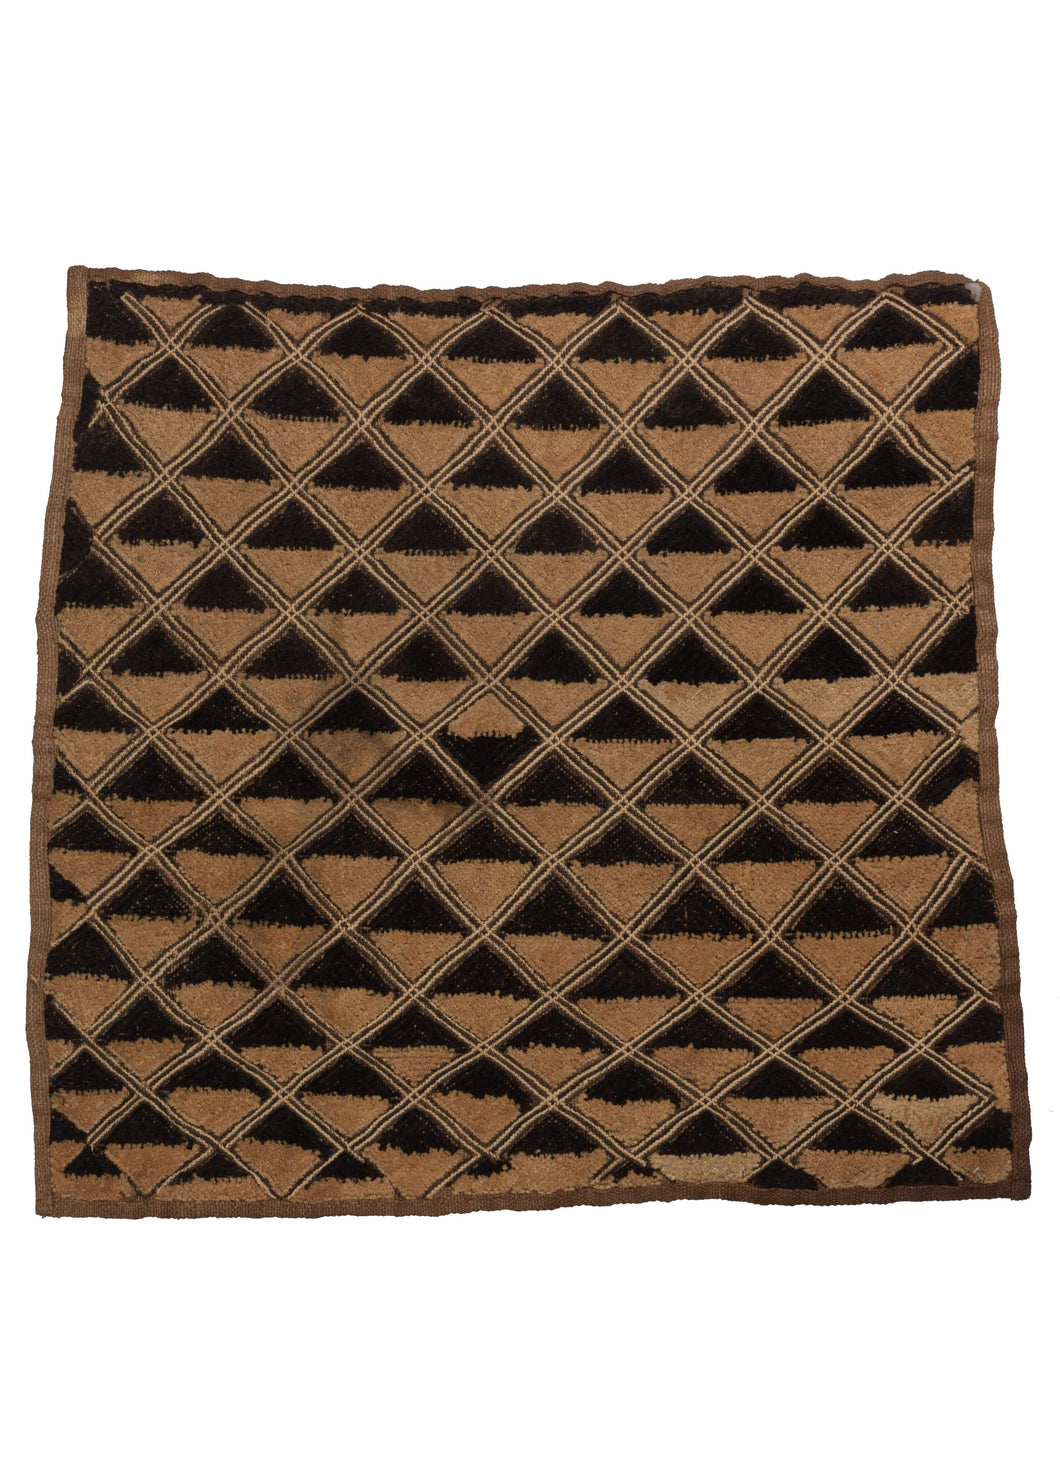 Congolese Kuba Cloth with velvet pile diamonds in black and neutral raffia